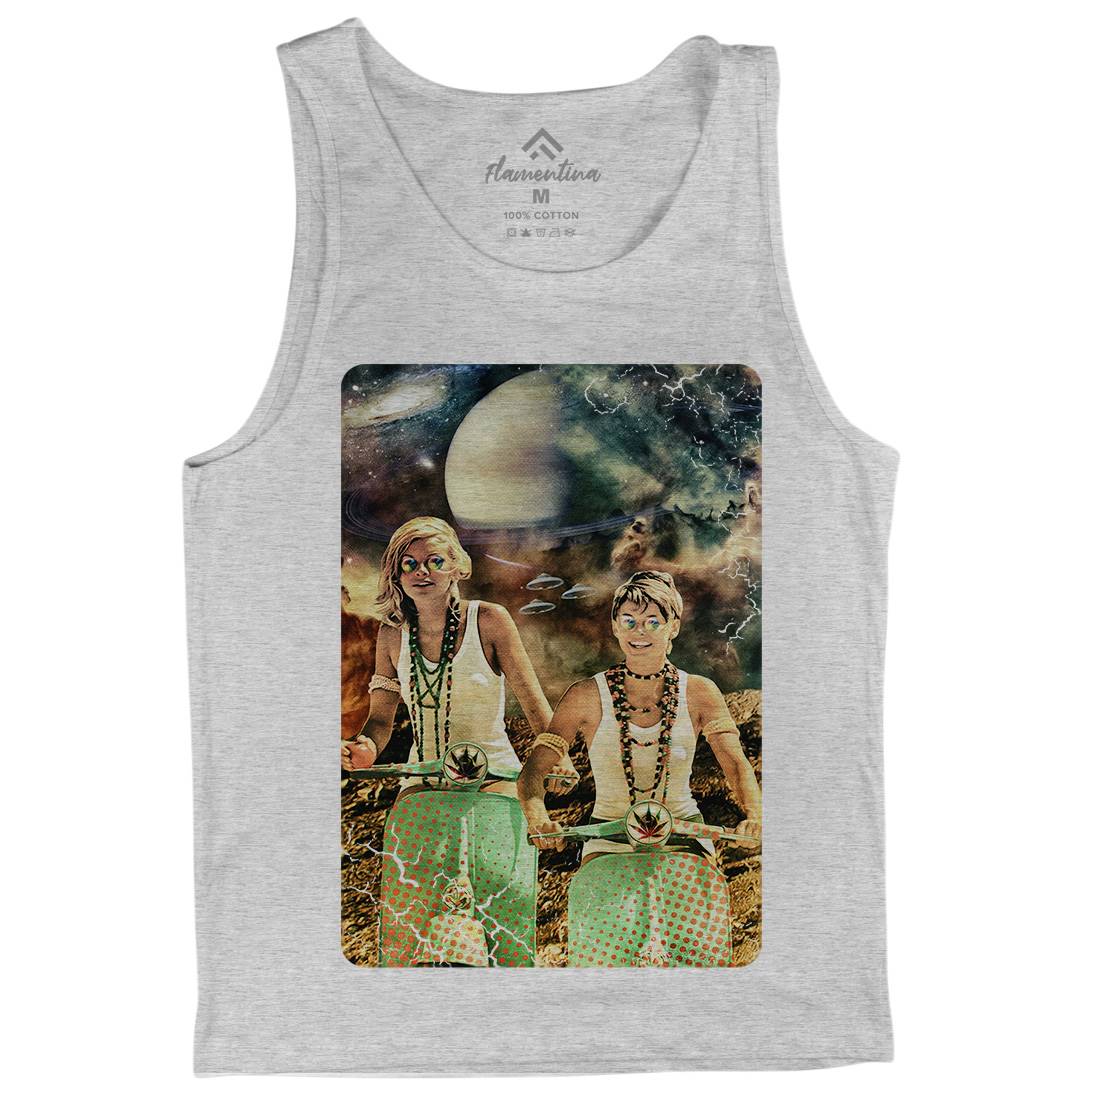 Galactic Cruise Mens Tank Top Vest Space A839